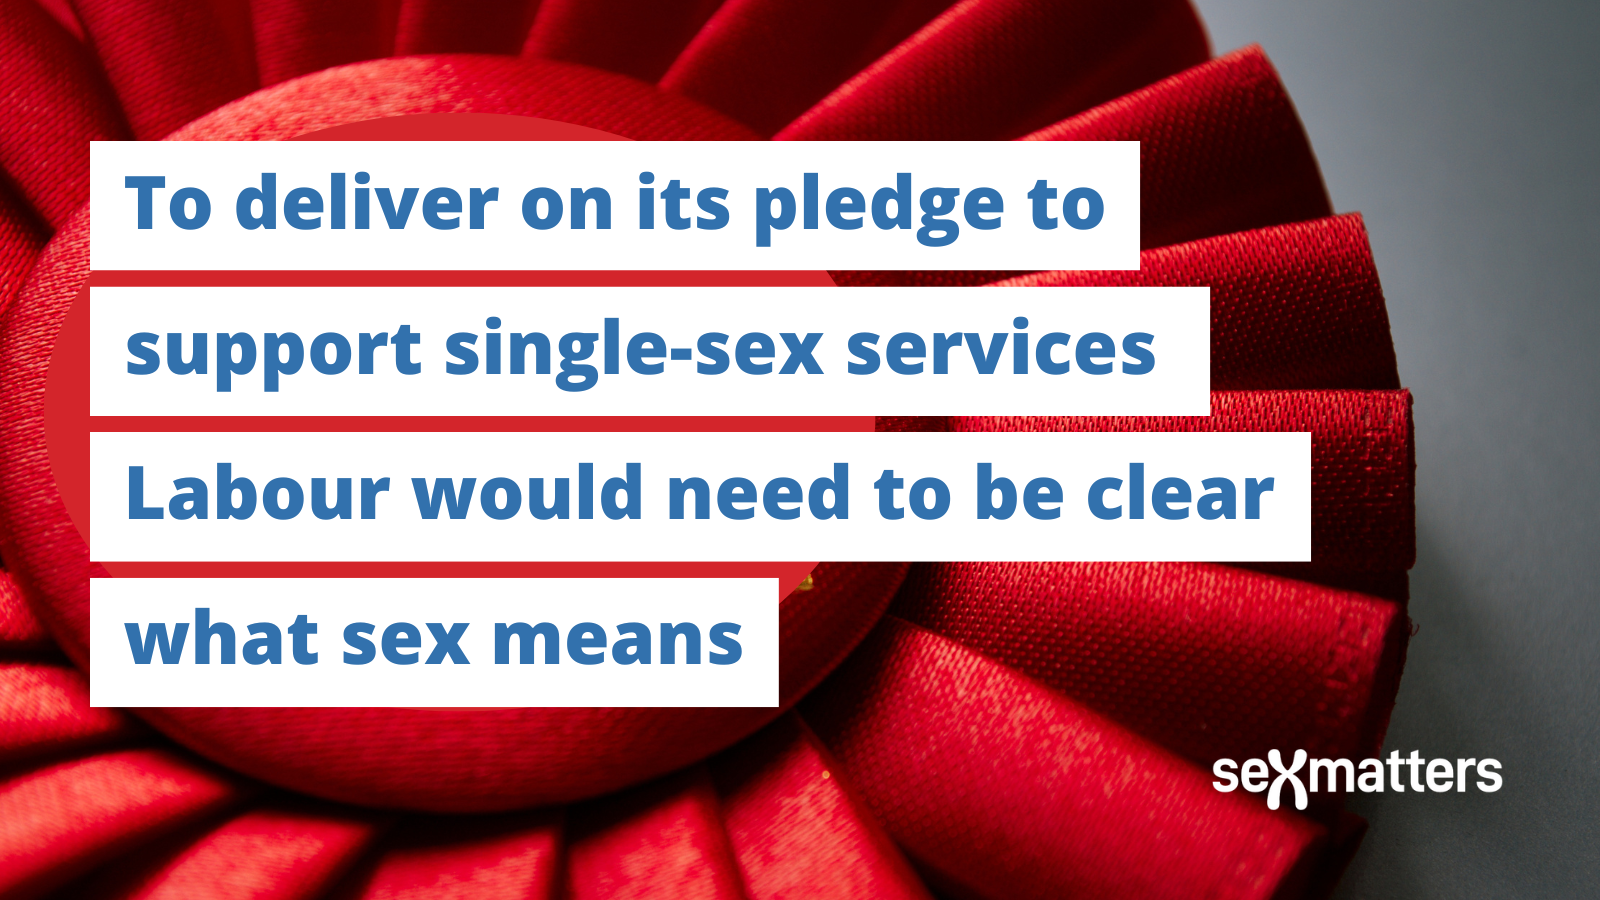 To deliver on its pledge to support single-sex services Labour would need to be clear what sex means